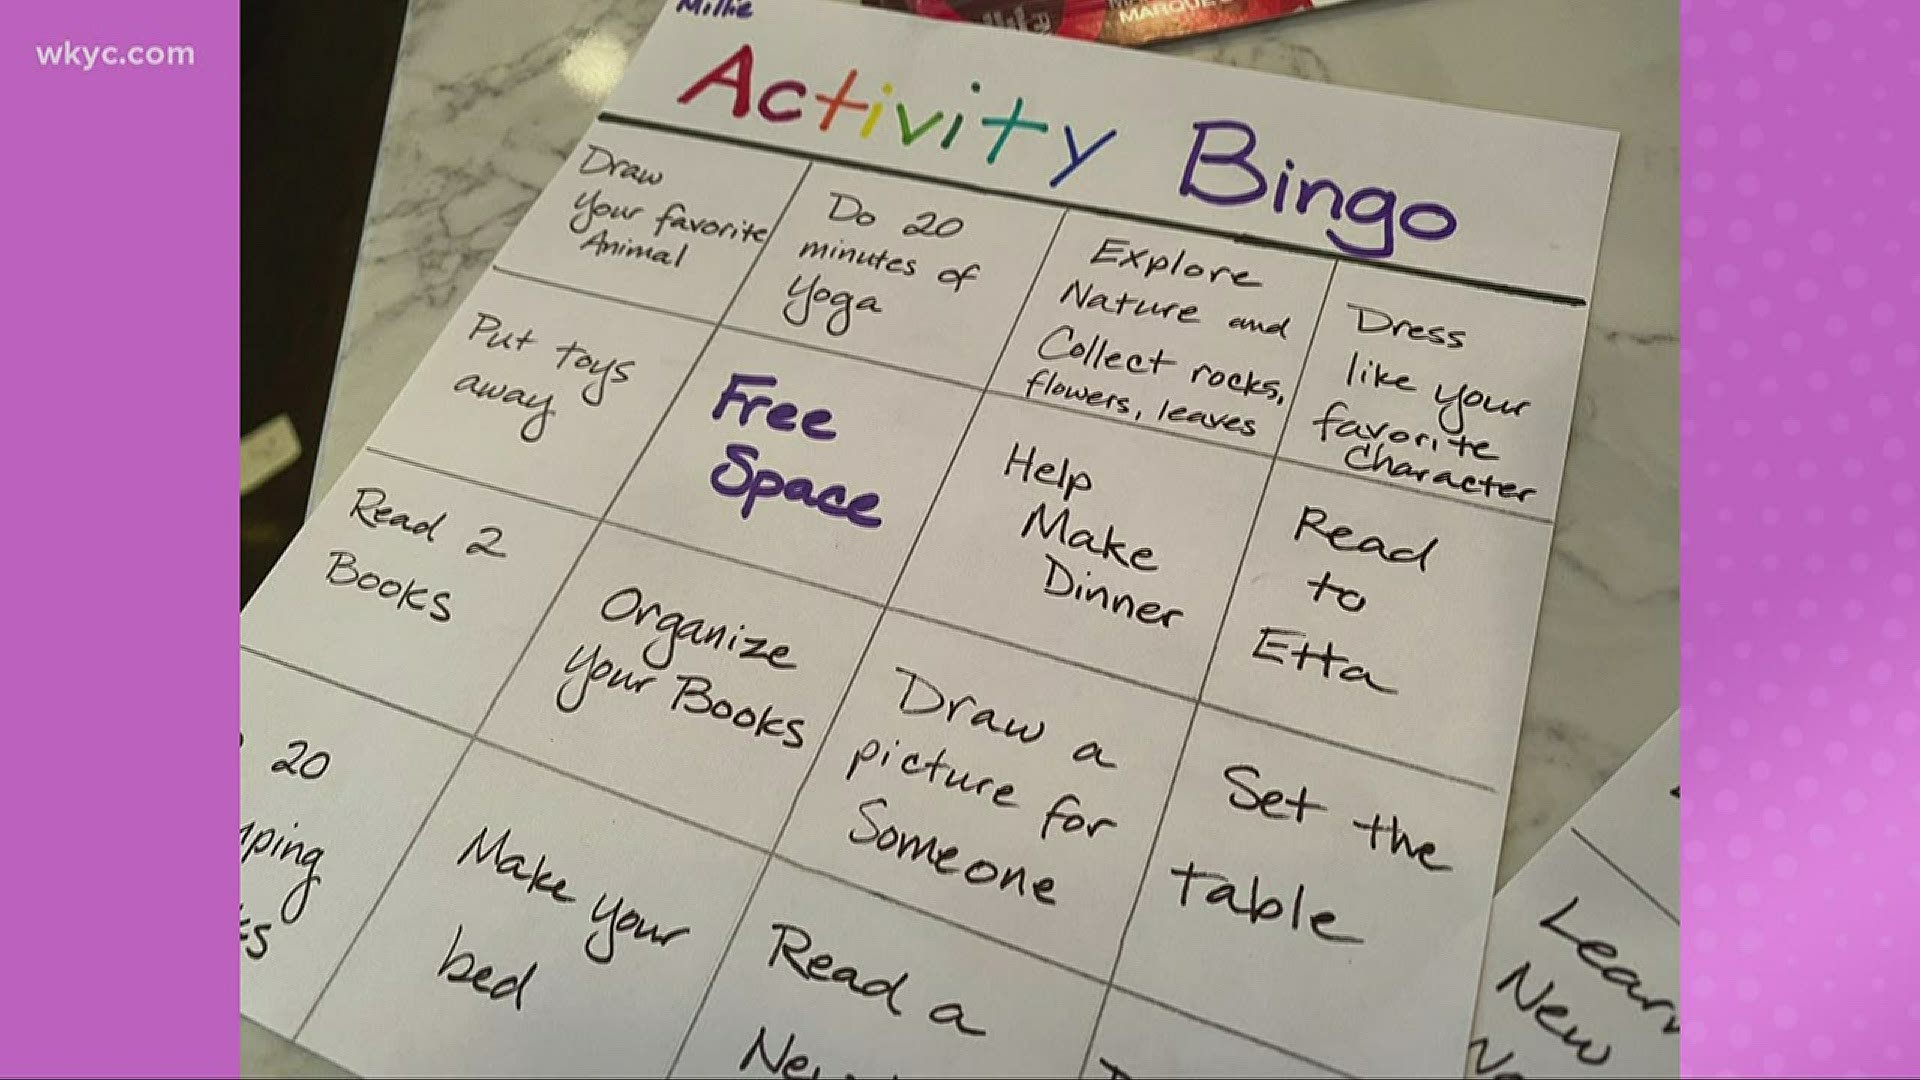 There’s a way to make even the most mundane activities seem like a fun game: Activity Bingo! Maureen Kyle shows us the rules and tasks she tried.